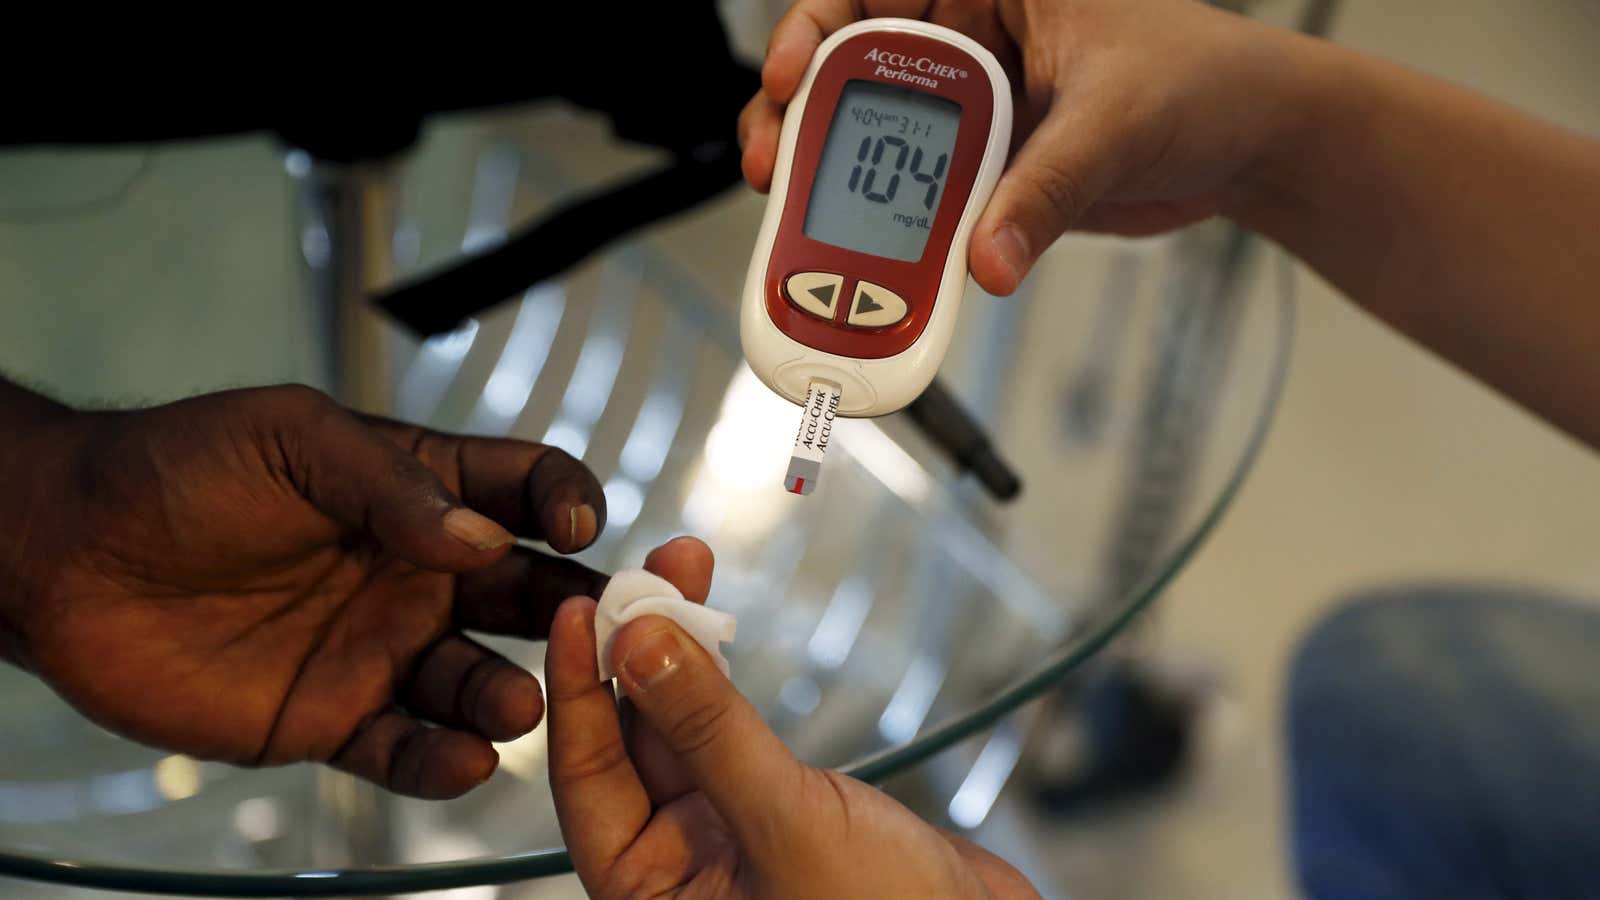 Checking on a diabetic patient’s blood sugar level